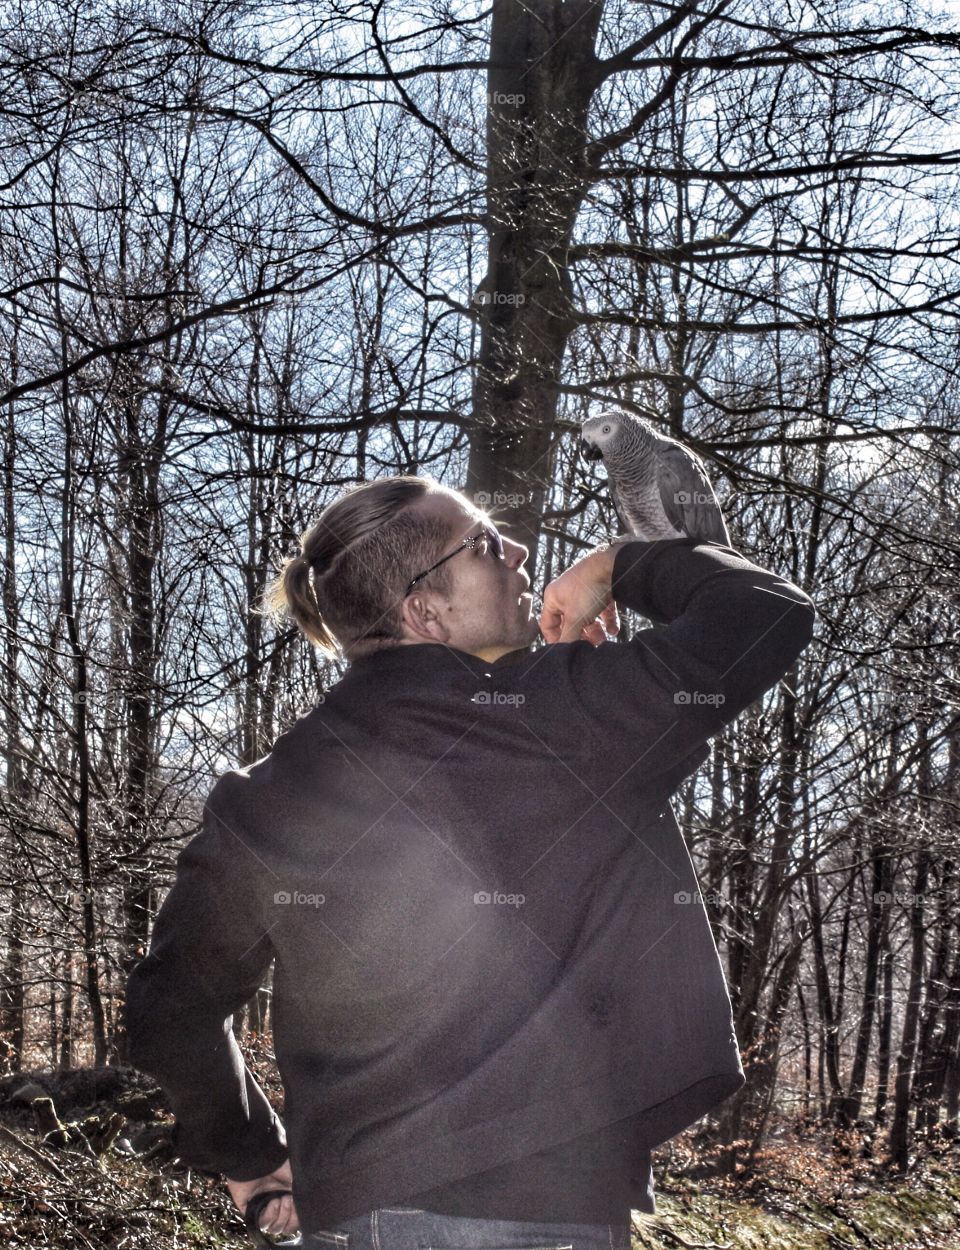 Rear view of a man with grey parrot